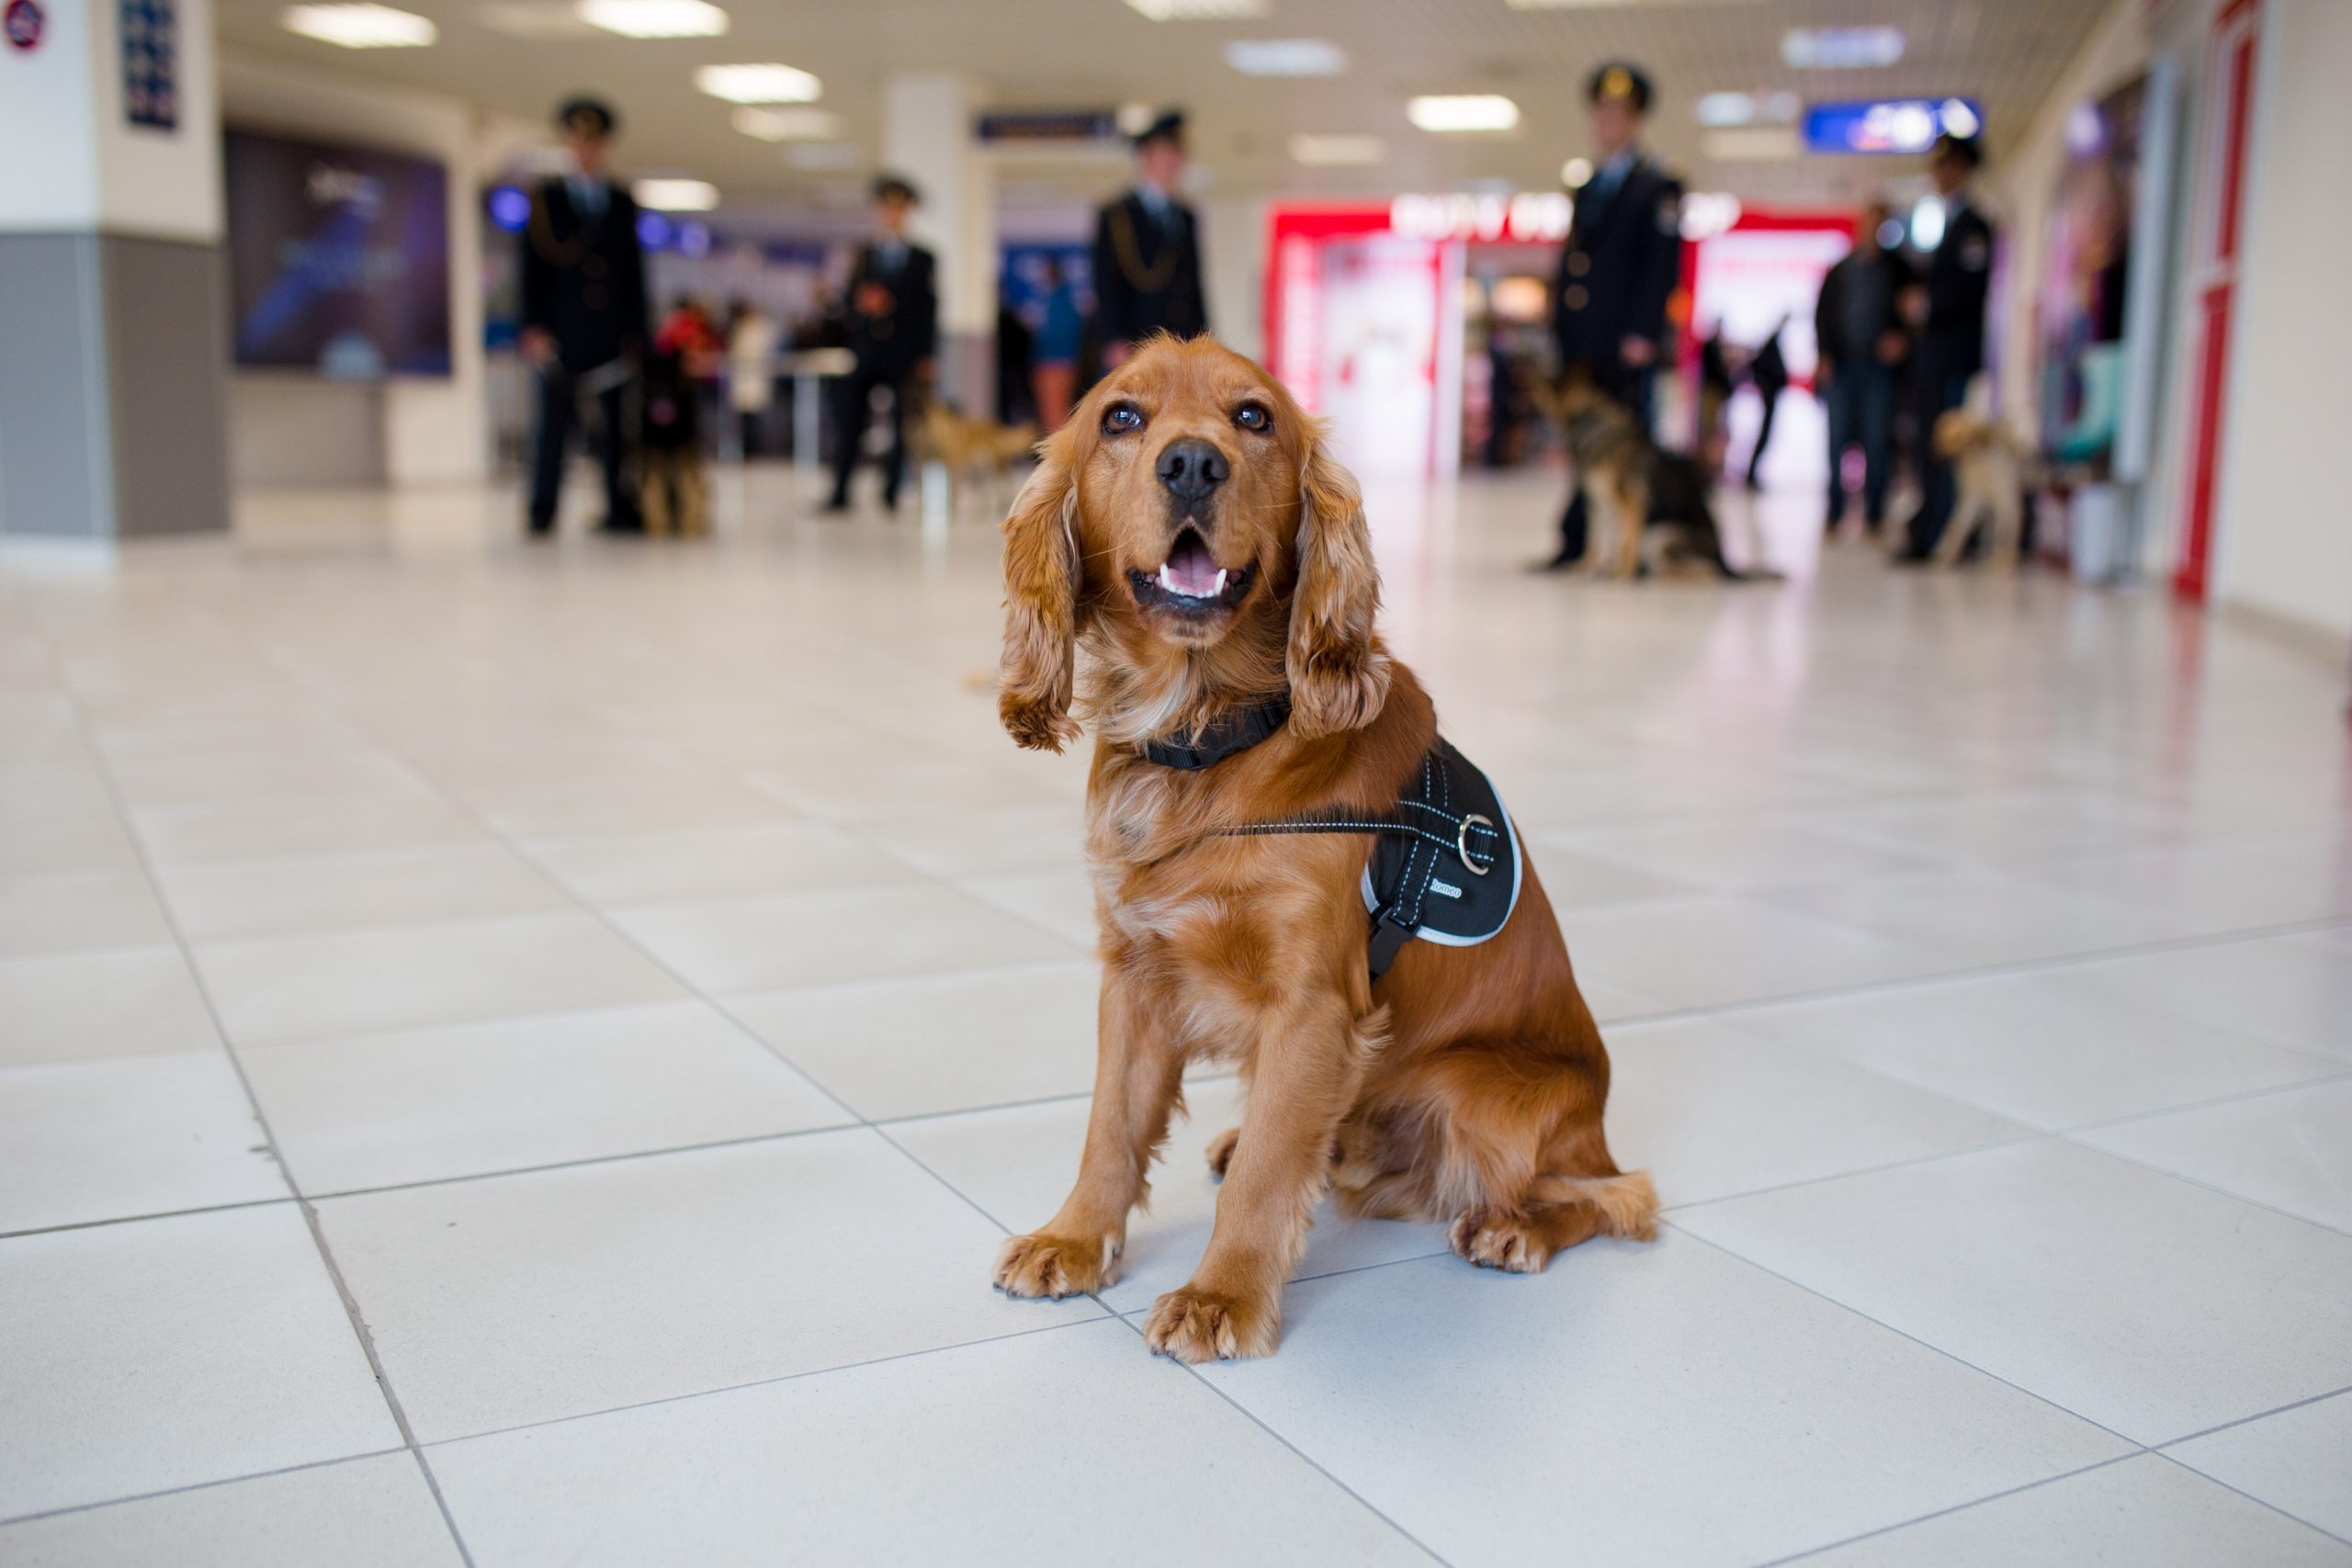 Airport service dog - Link to DogDetectives case study